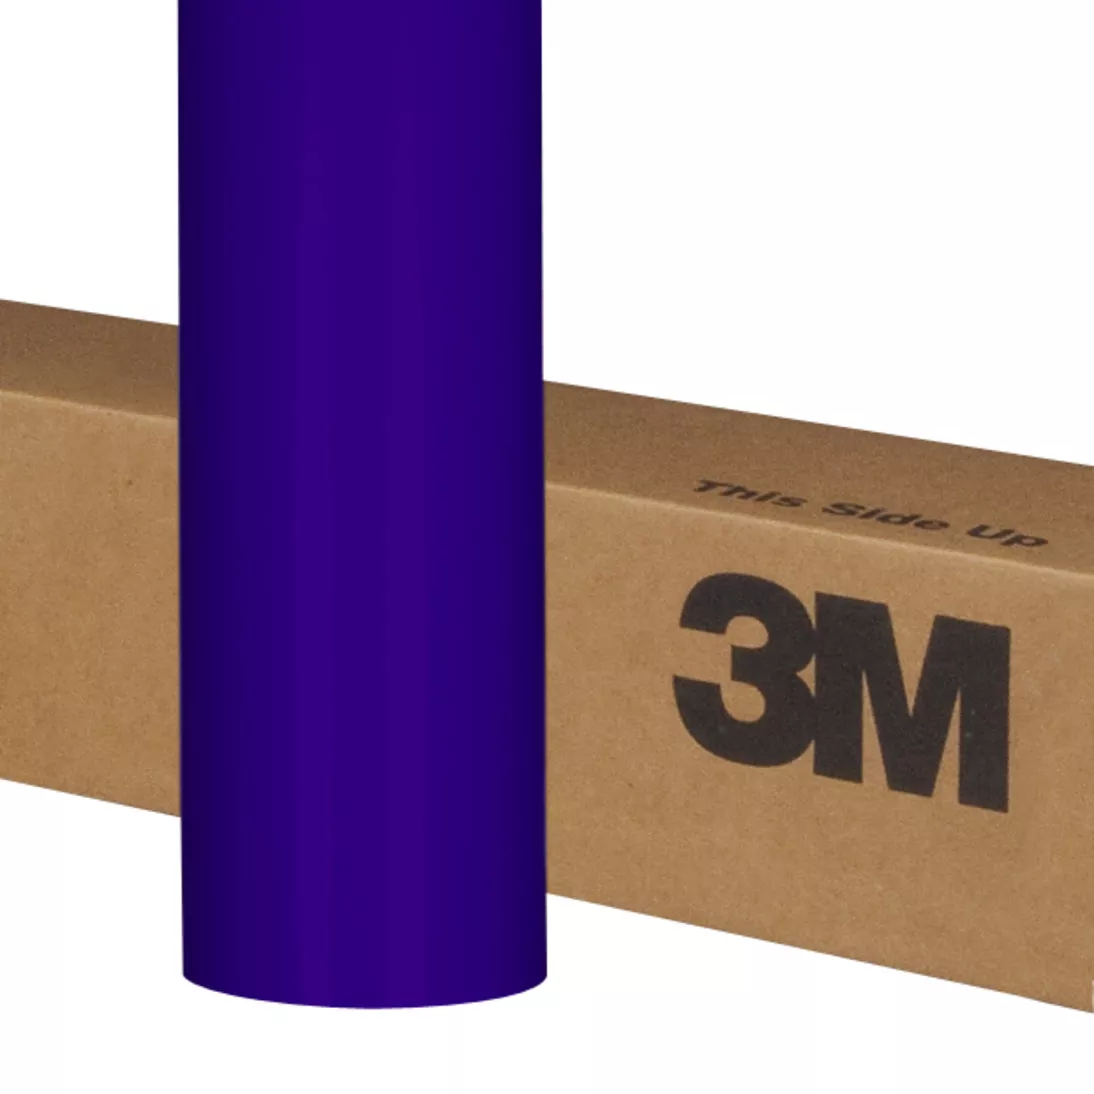 3M™ Scotchcal™ ElectroCut™ Graphic Film Series 7725-38, Royal Purple, 48 in x 50 yd